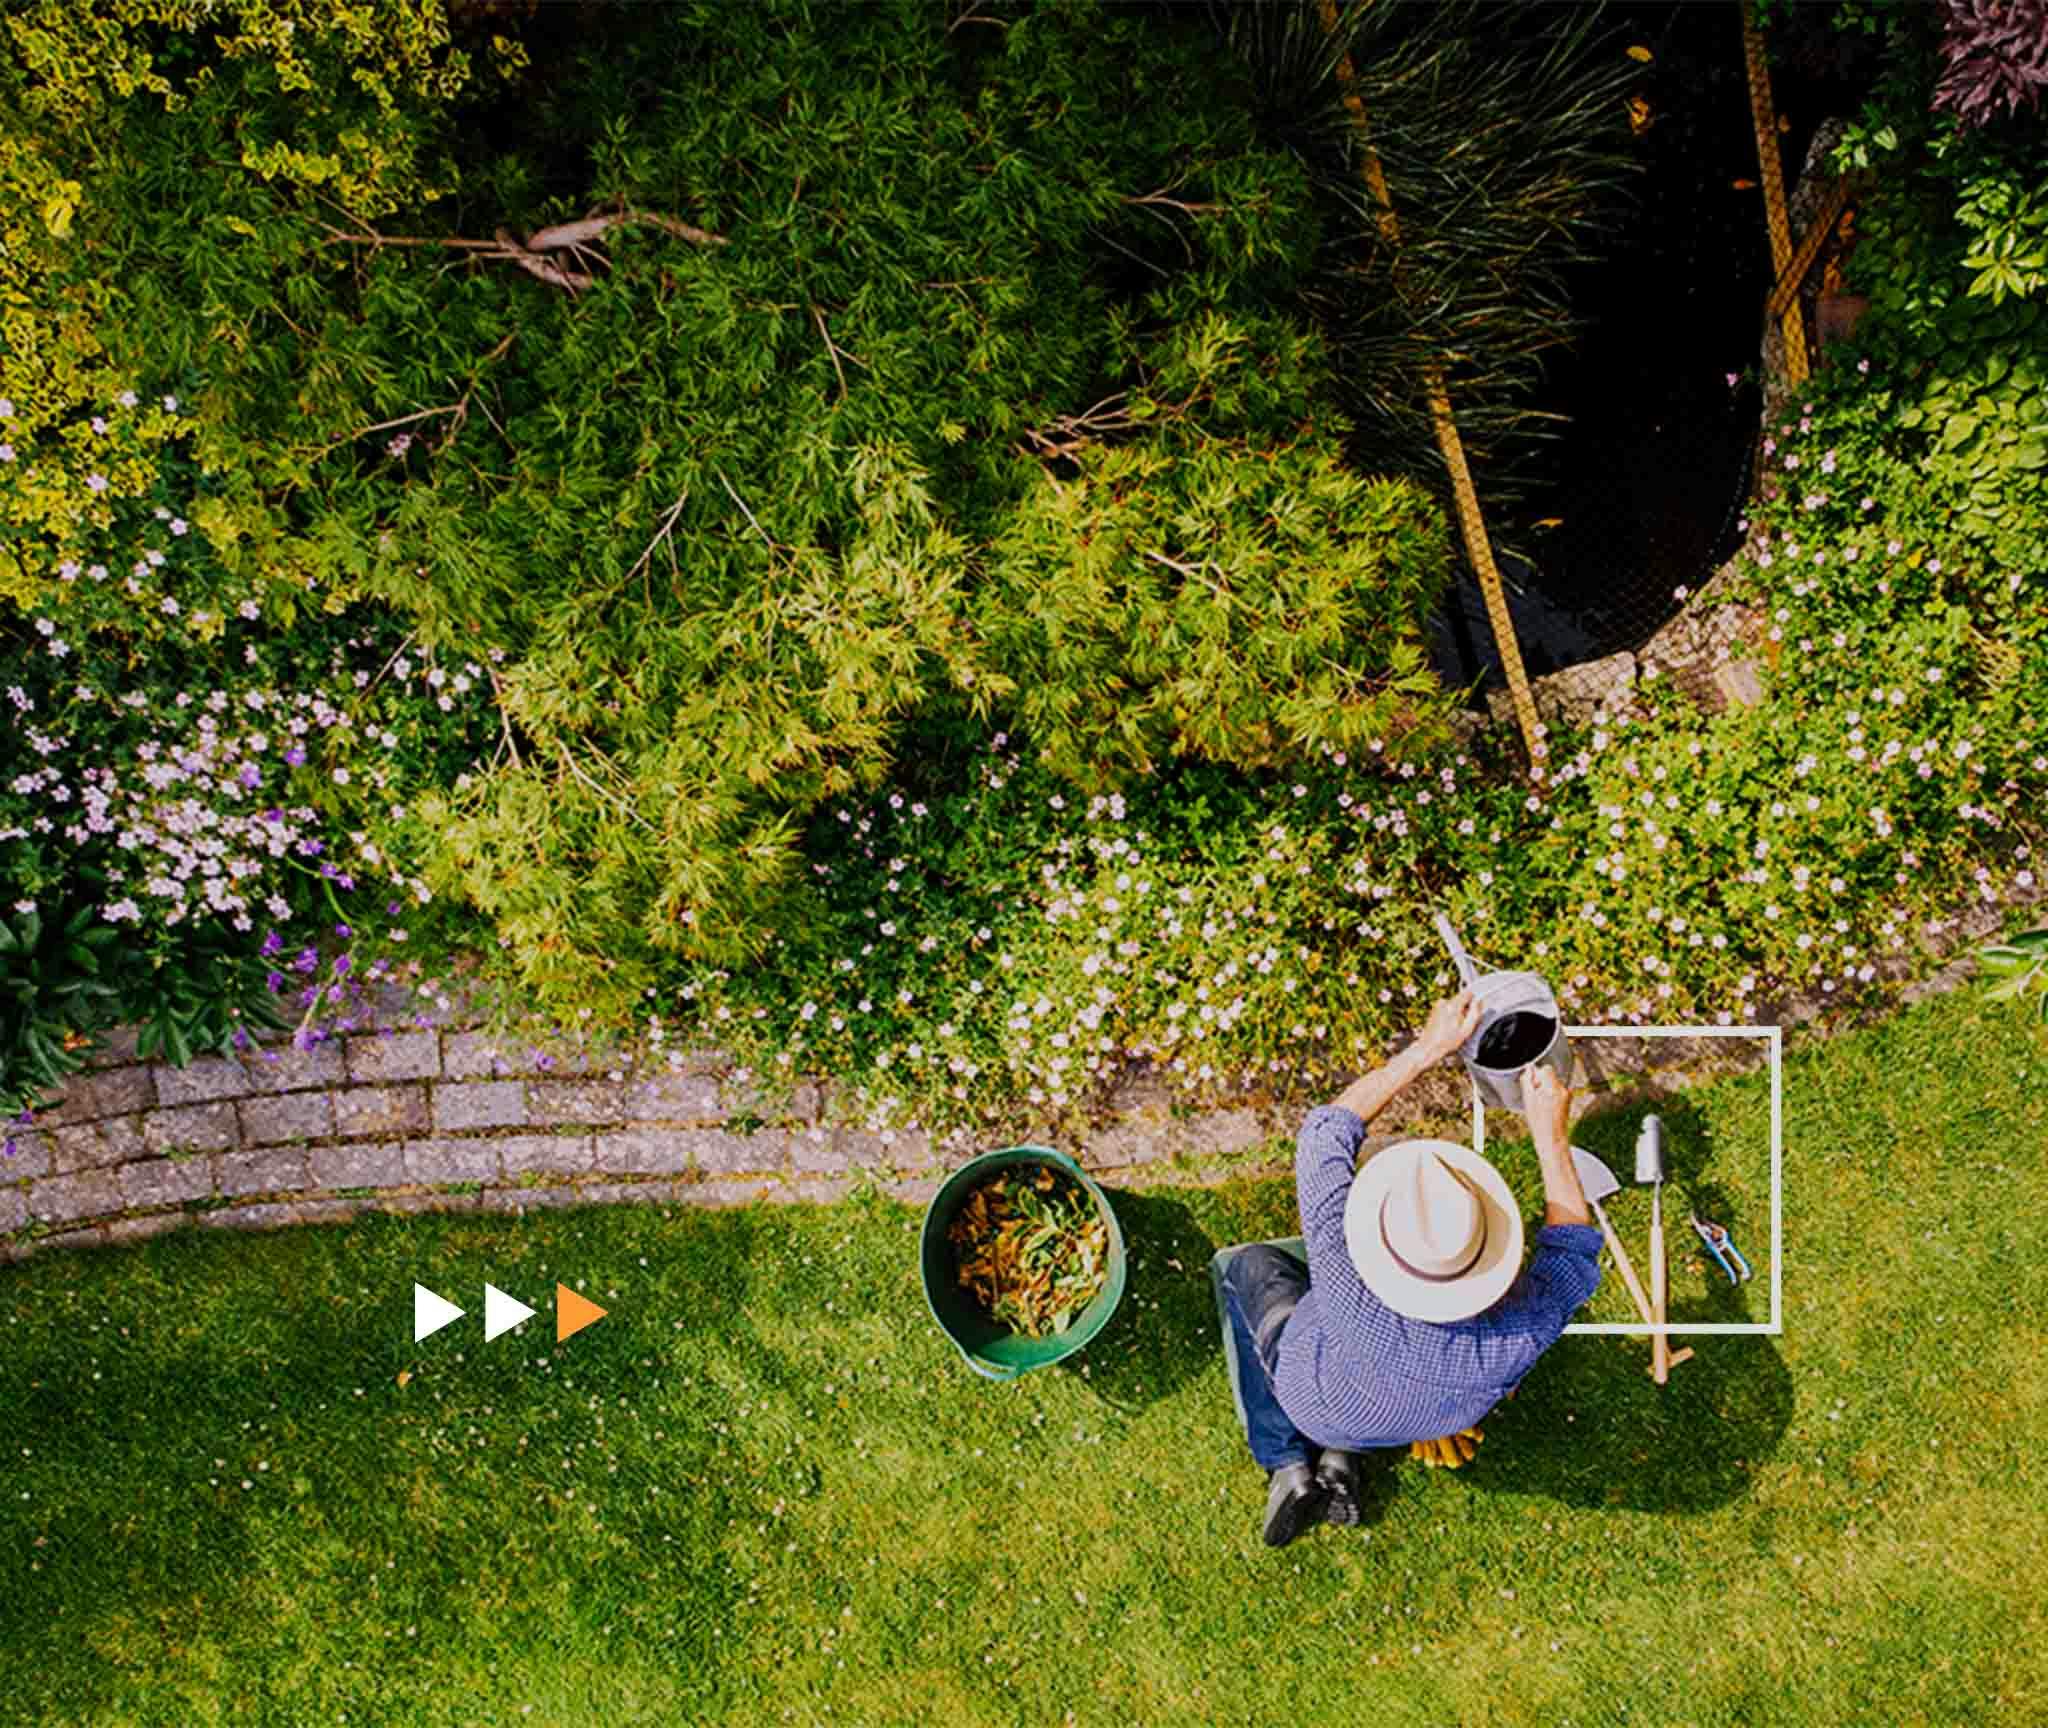 man watering a flowerbed on his garden lawn